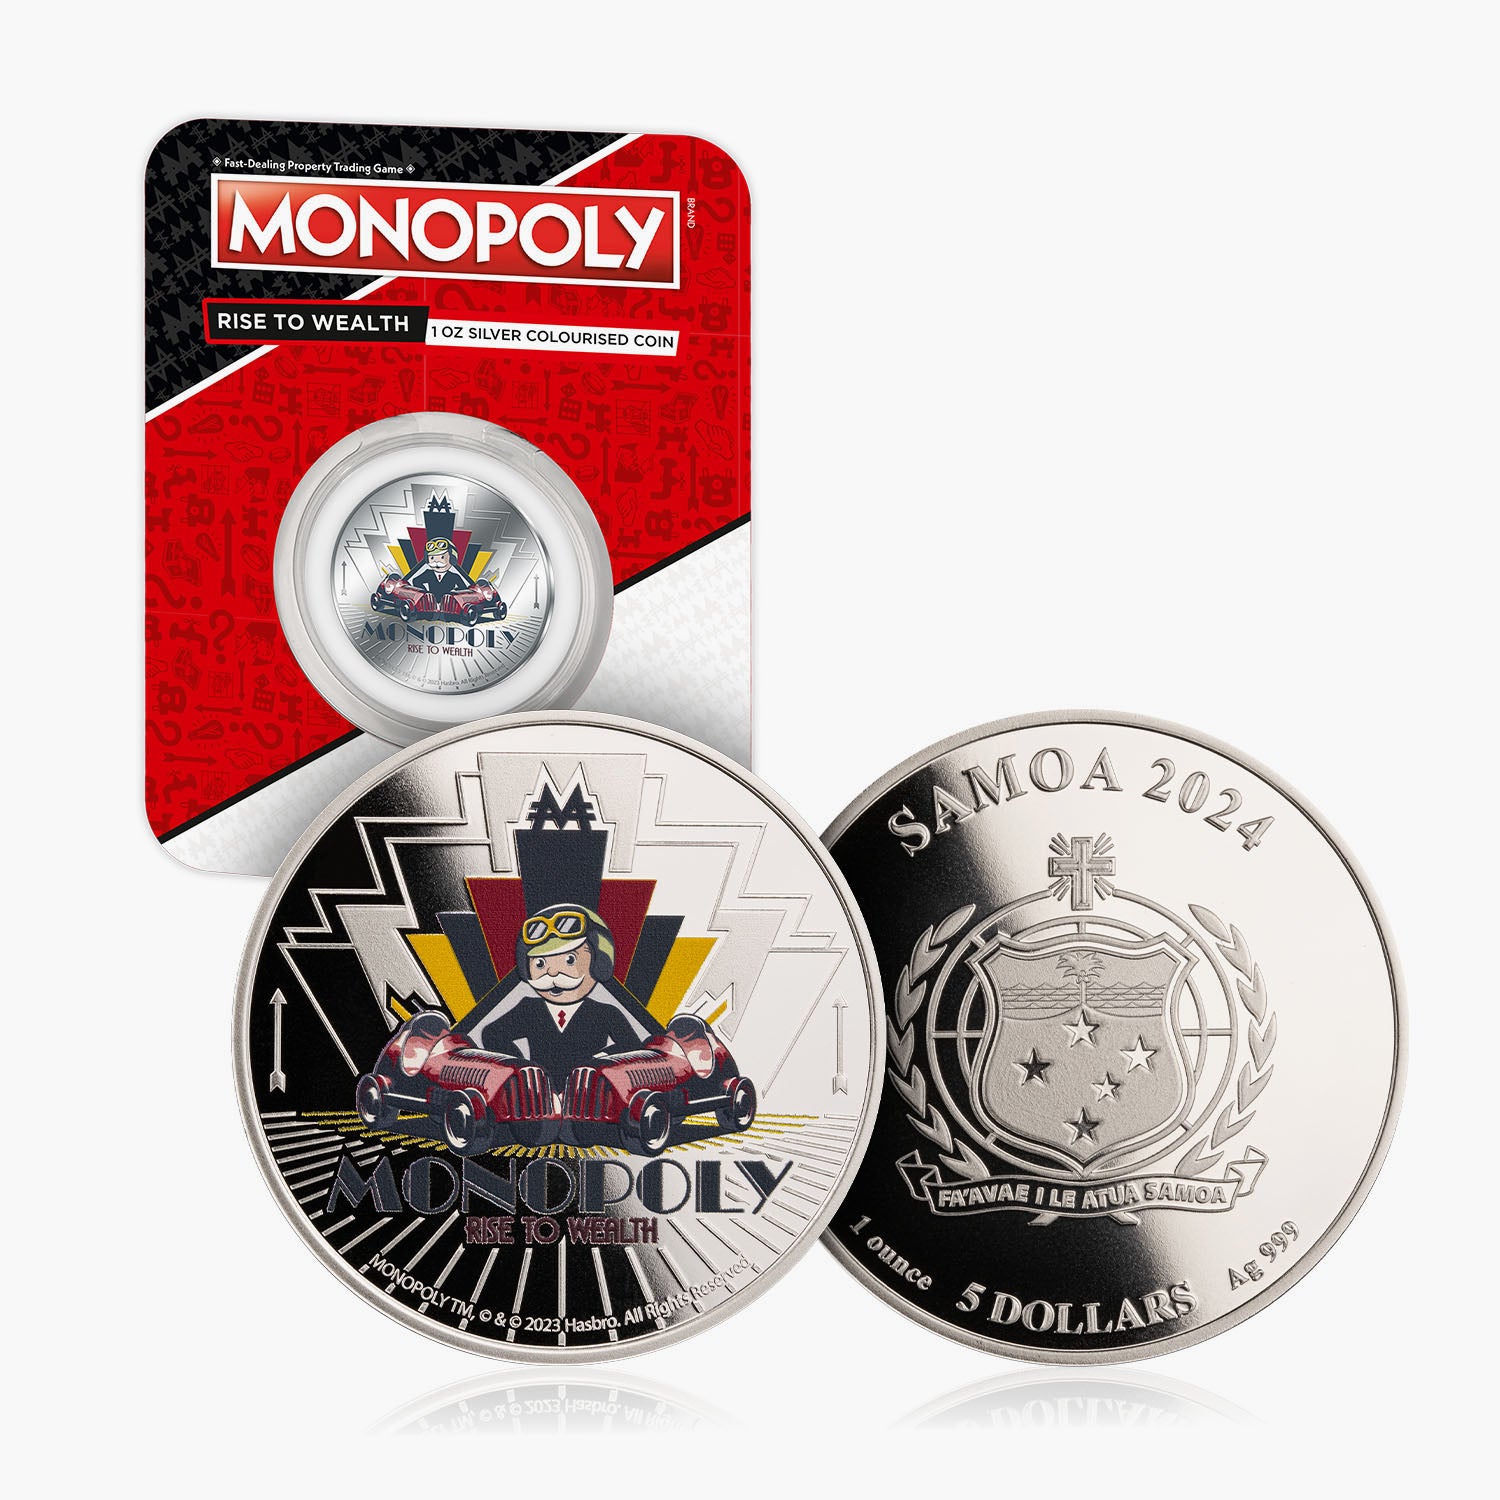 Monopoly Rise To Wealth Solid Silver 1oz coin